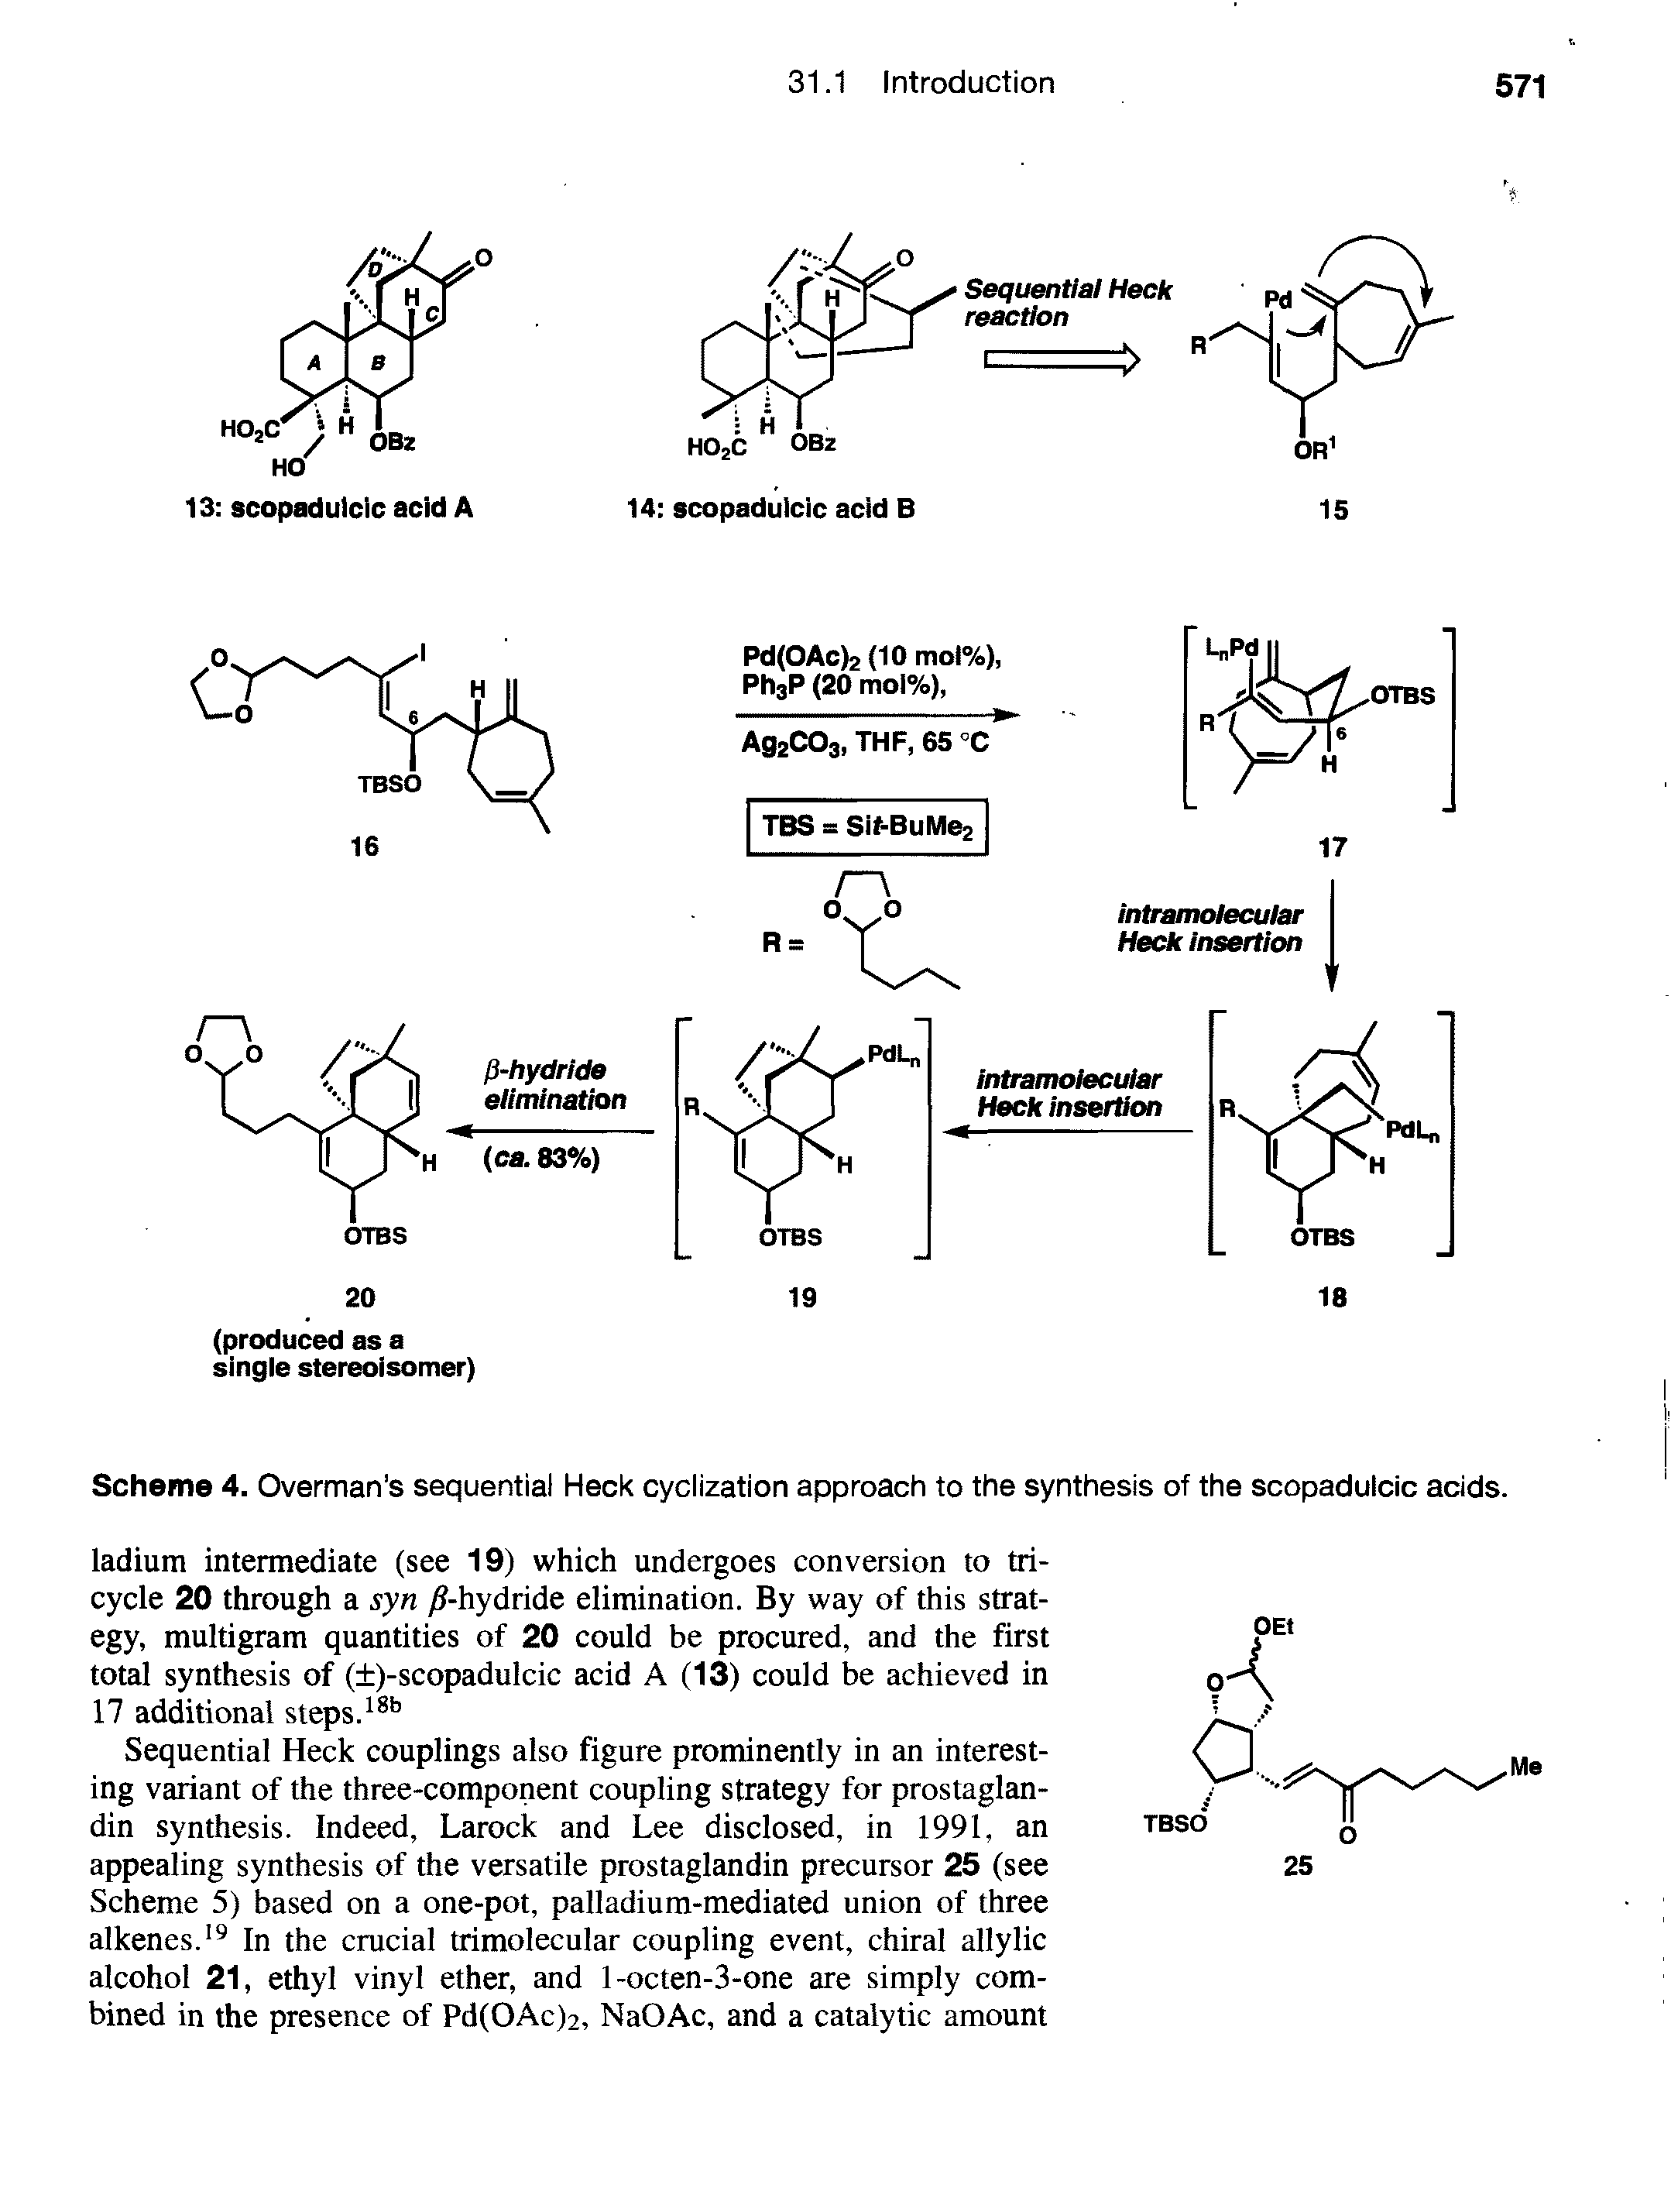 Scheme 4. Overman s sequential Heck cyclization approach to the synthesis of the scopadulcic acids.